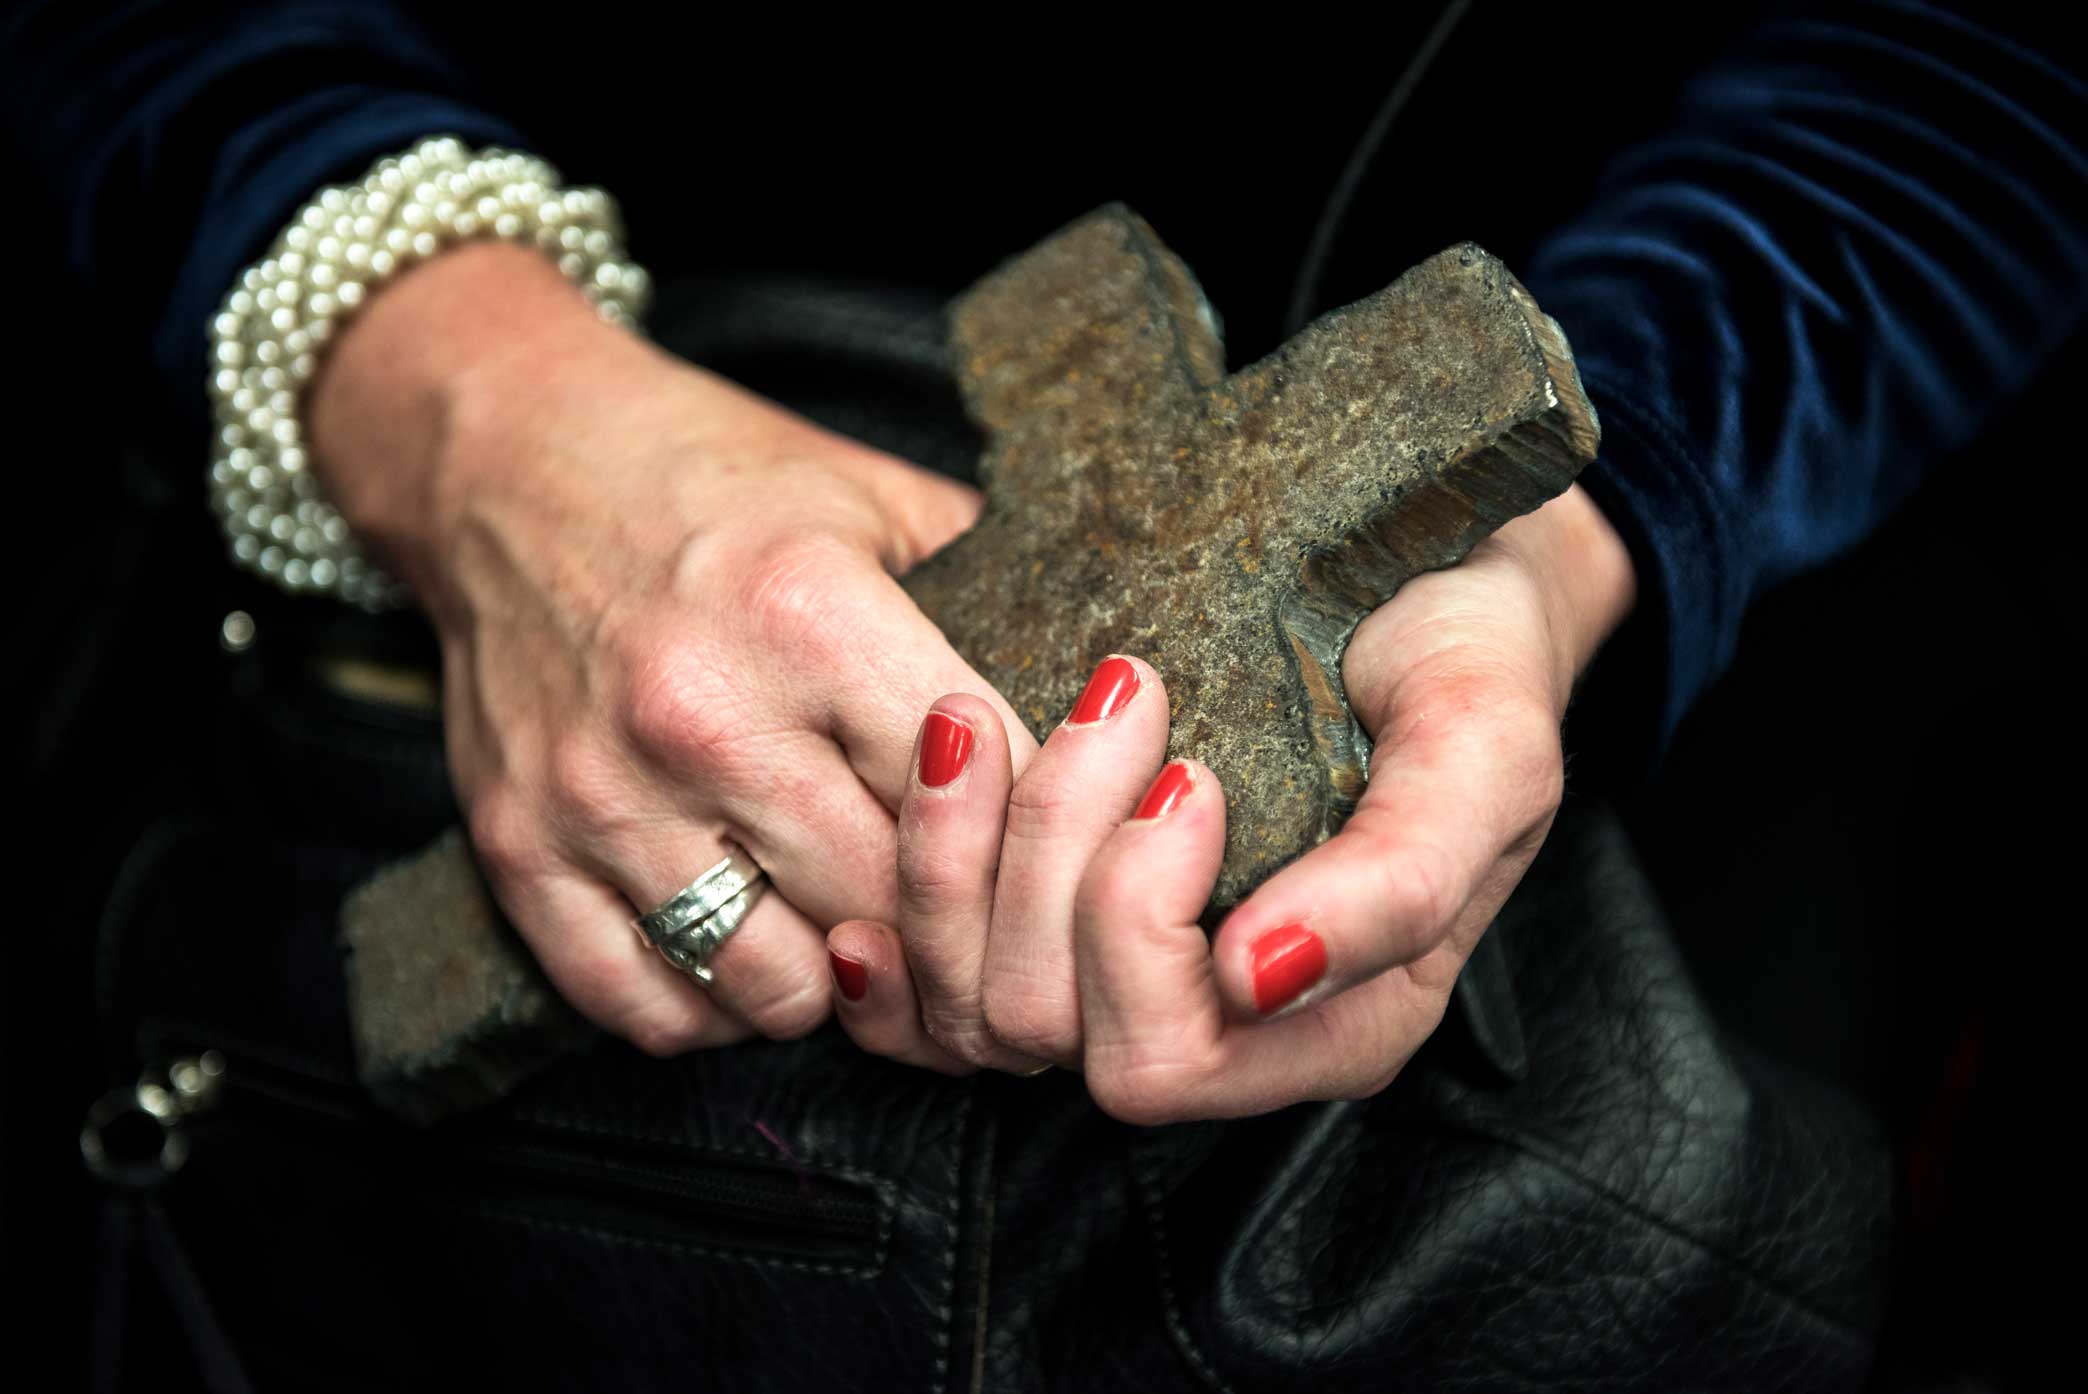  Susan Ryan-Loback holds a cross made out of the steel from the World Trade Center.&nbsp;Susan volunteered with her husband, Thomas Loback, at ground zero for months, providing support to the search, rescue and recovery efforts. Thomas passed away th